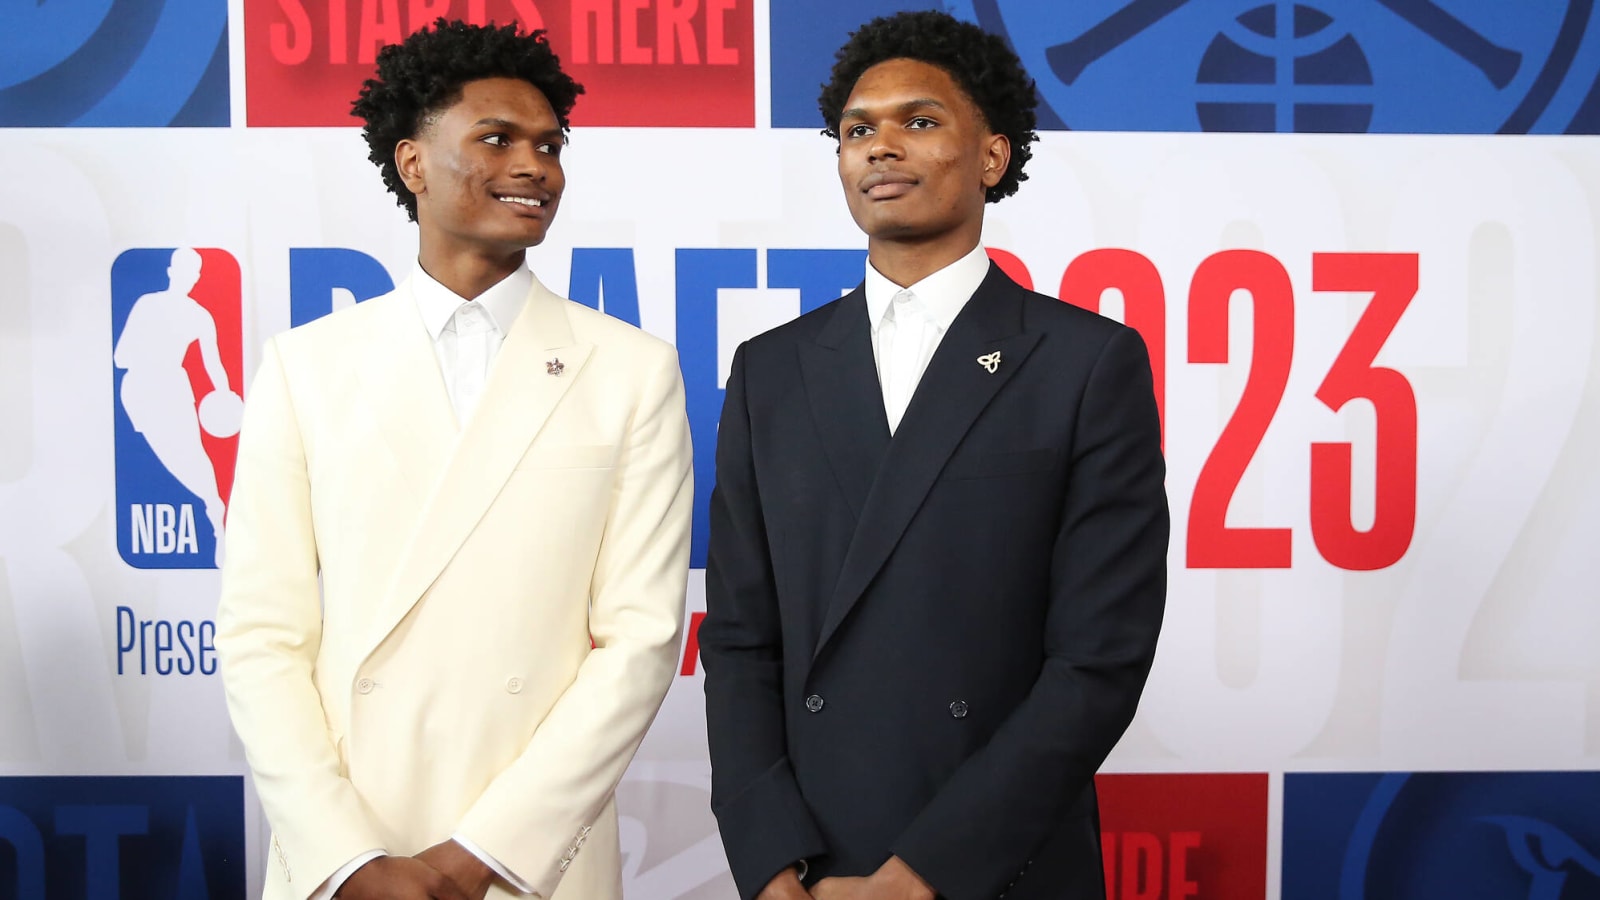 Rare NBA Draft feat with twins not a first in sports Yardbarker